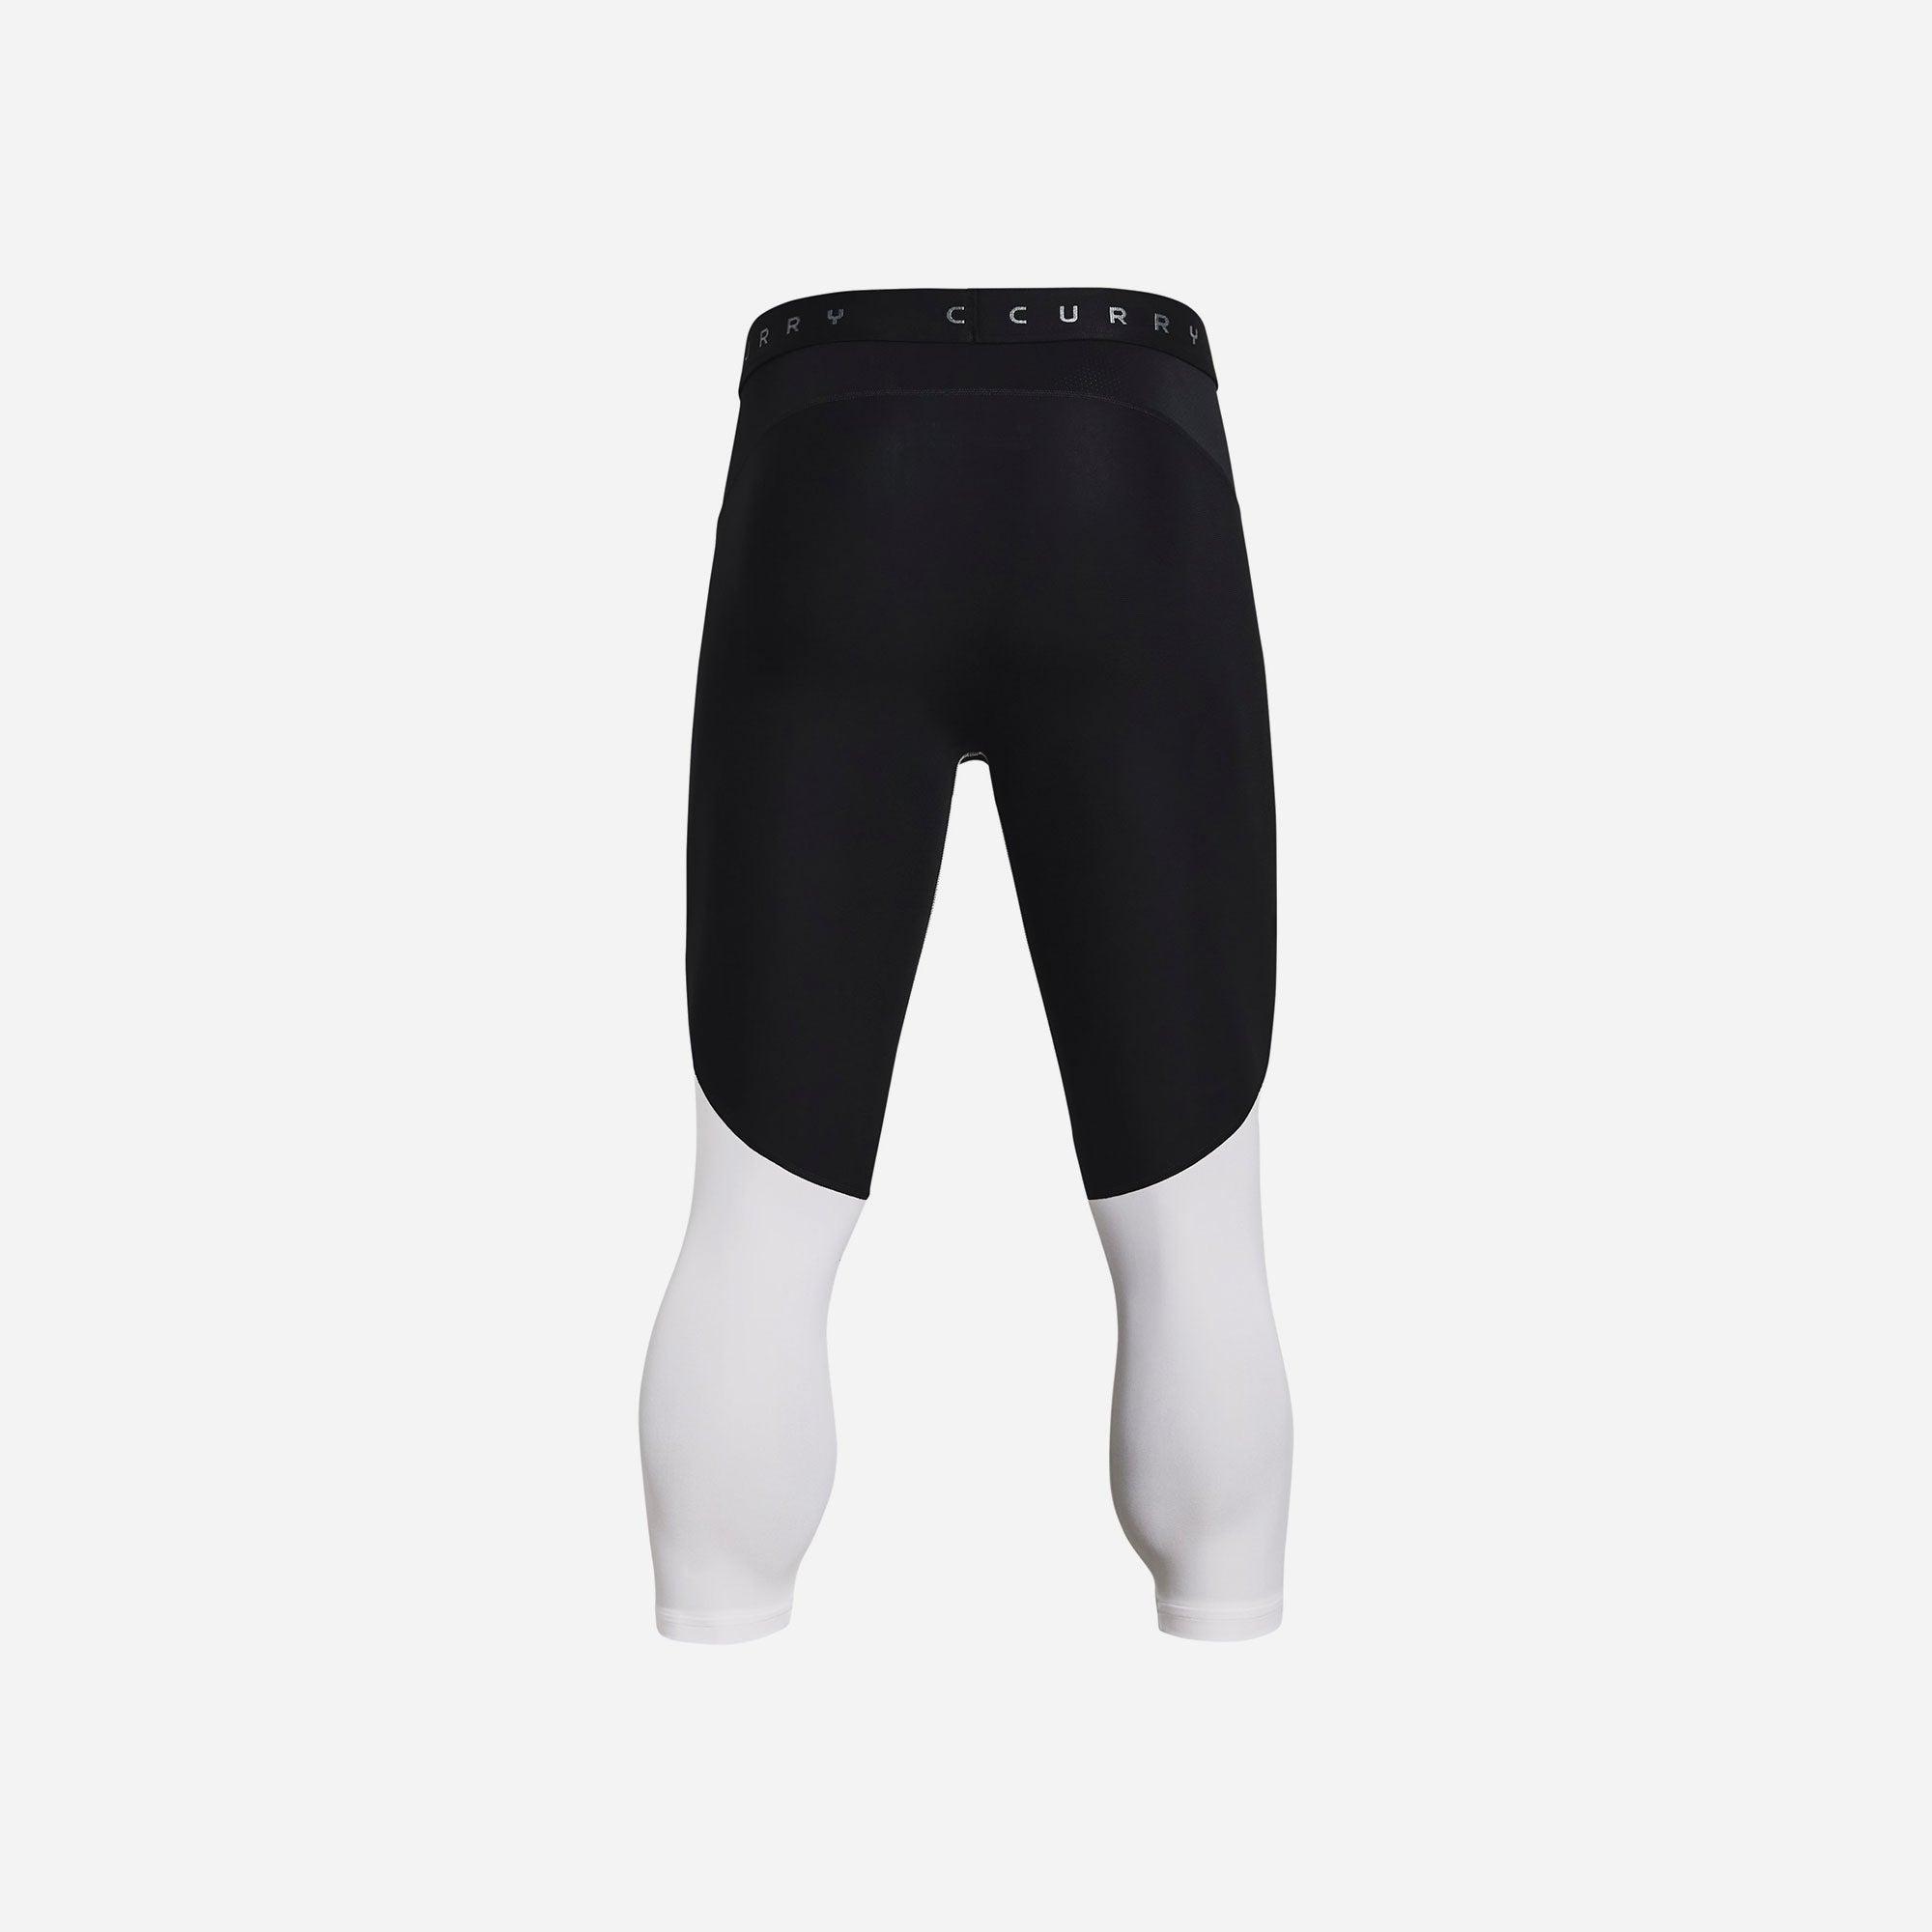 Quần dài thể thao nam Under Armour Curry Undrtd ¾ Tights - 1362586-001